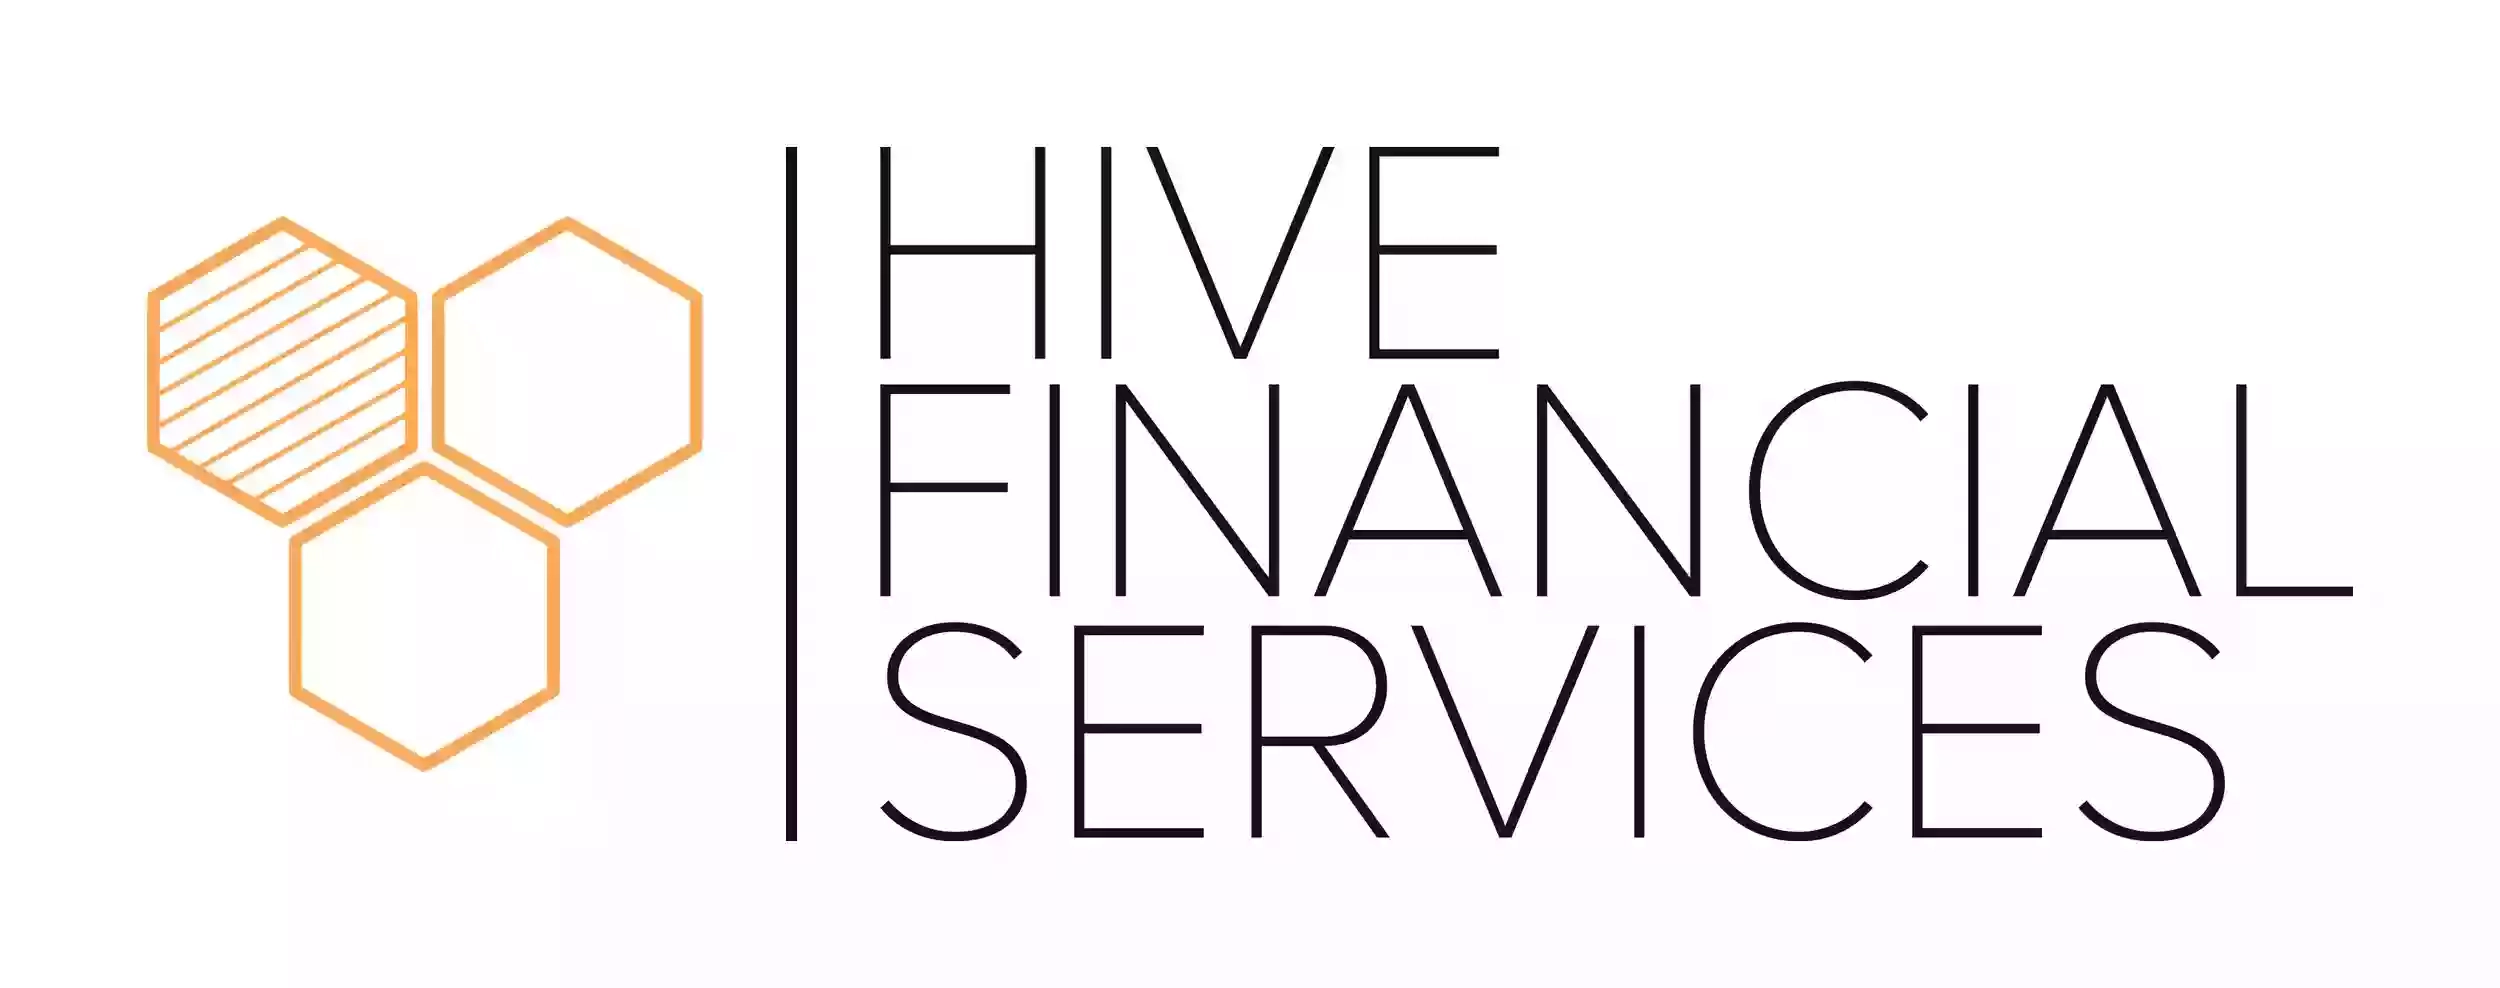 Hive Financial Services